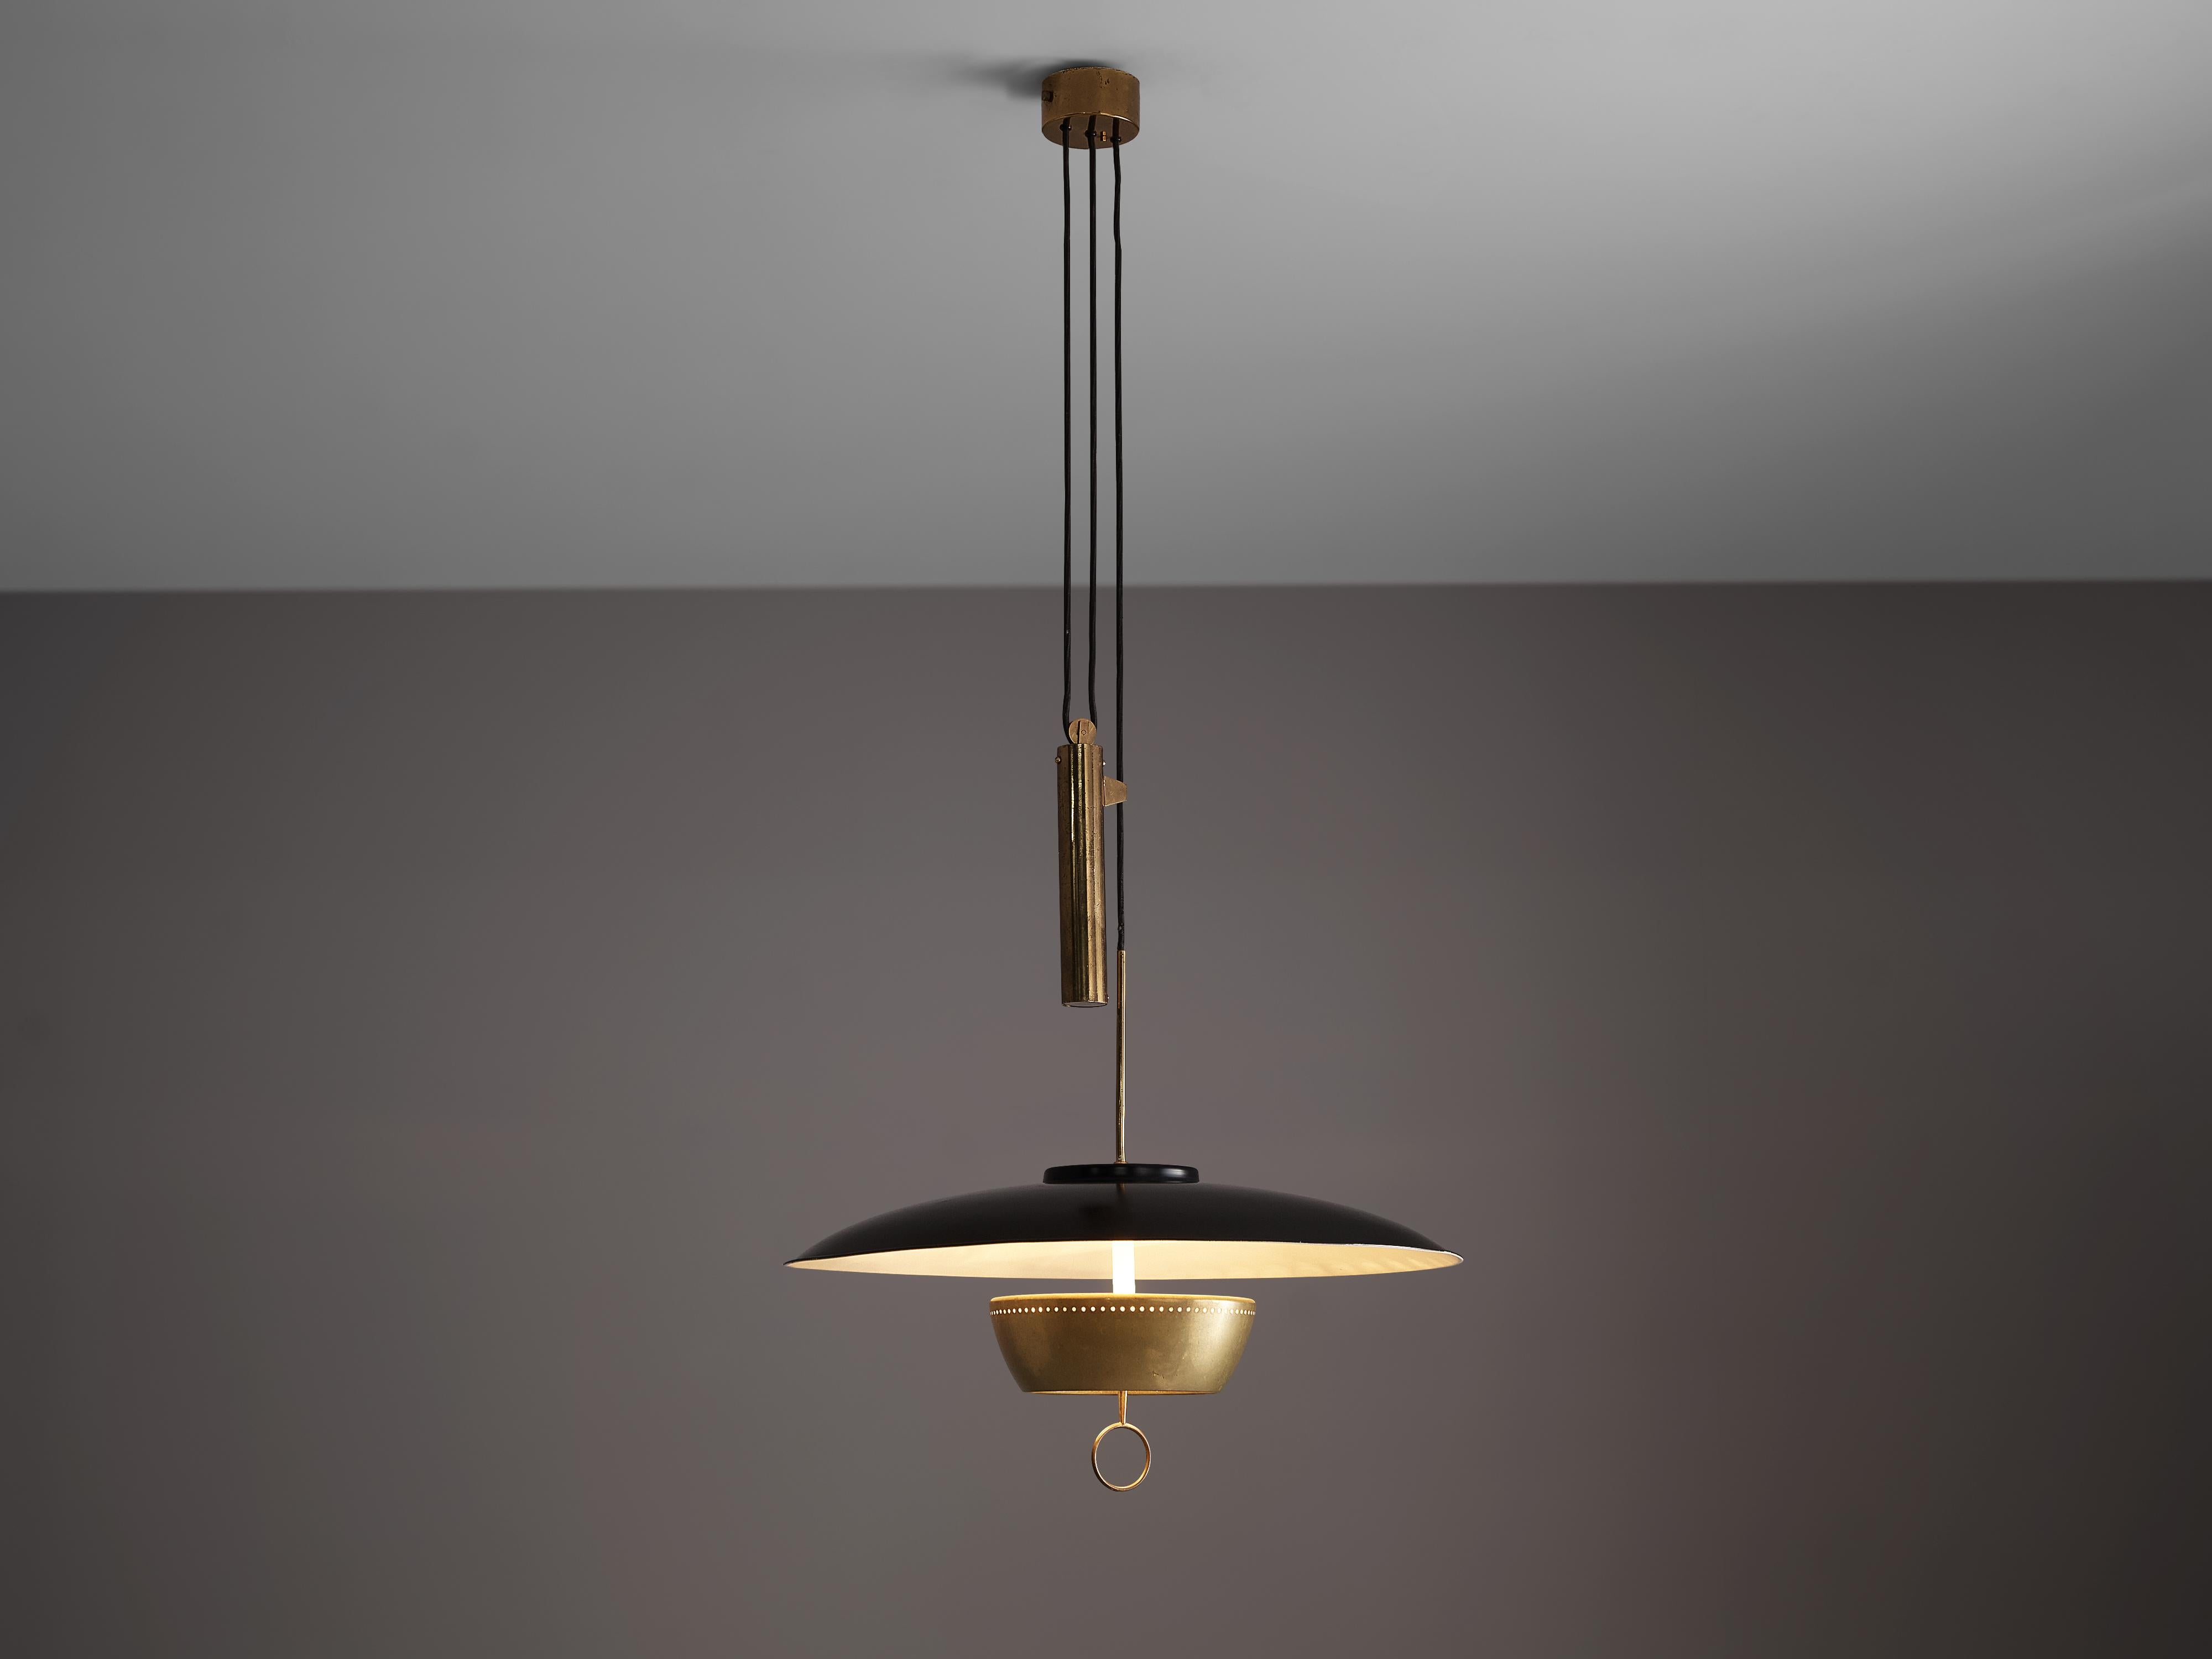 Gaetano Sciolari for Stilnovo, ceiling light model A5011, metal, brass, Italy, 1950

Elegant dynamic and modern pendant by Sciolari for Stilnovo. Adjustable in height due the counterweight. The light gets beautifully reflected by the white inside of